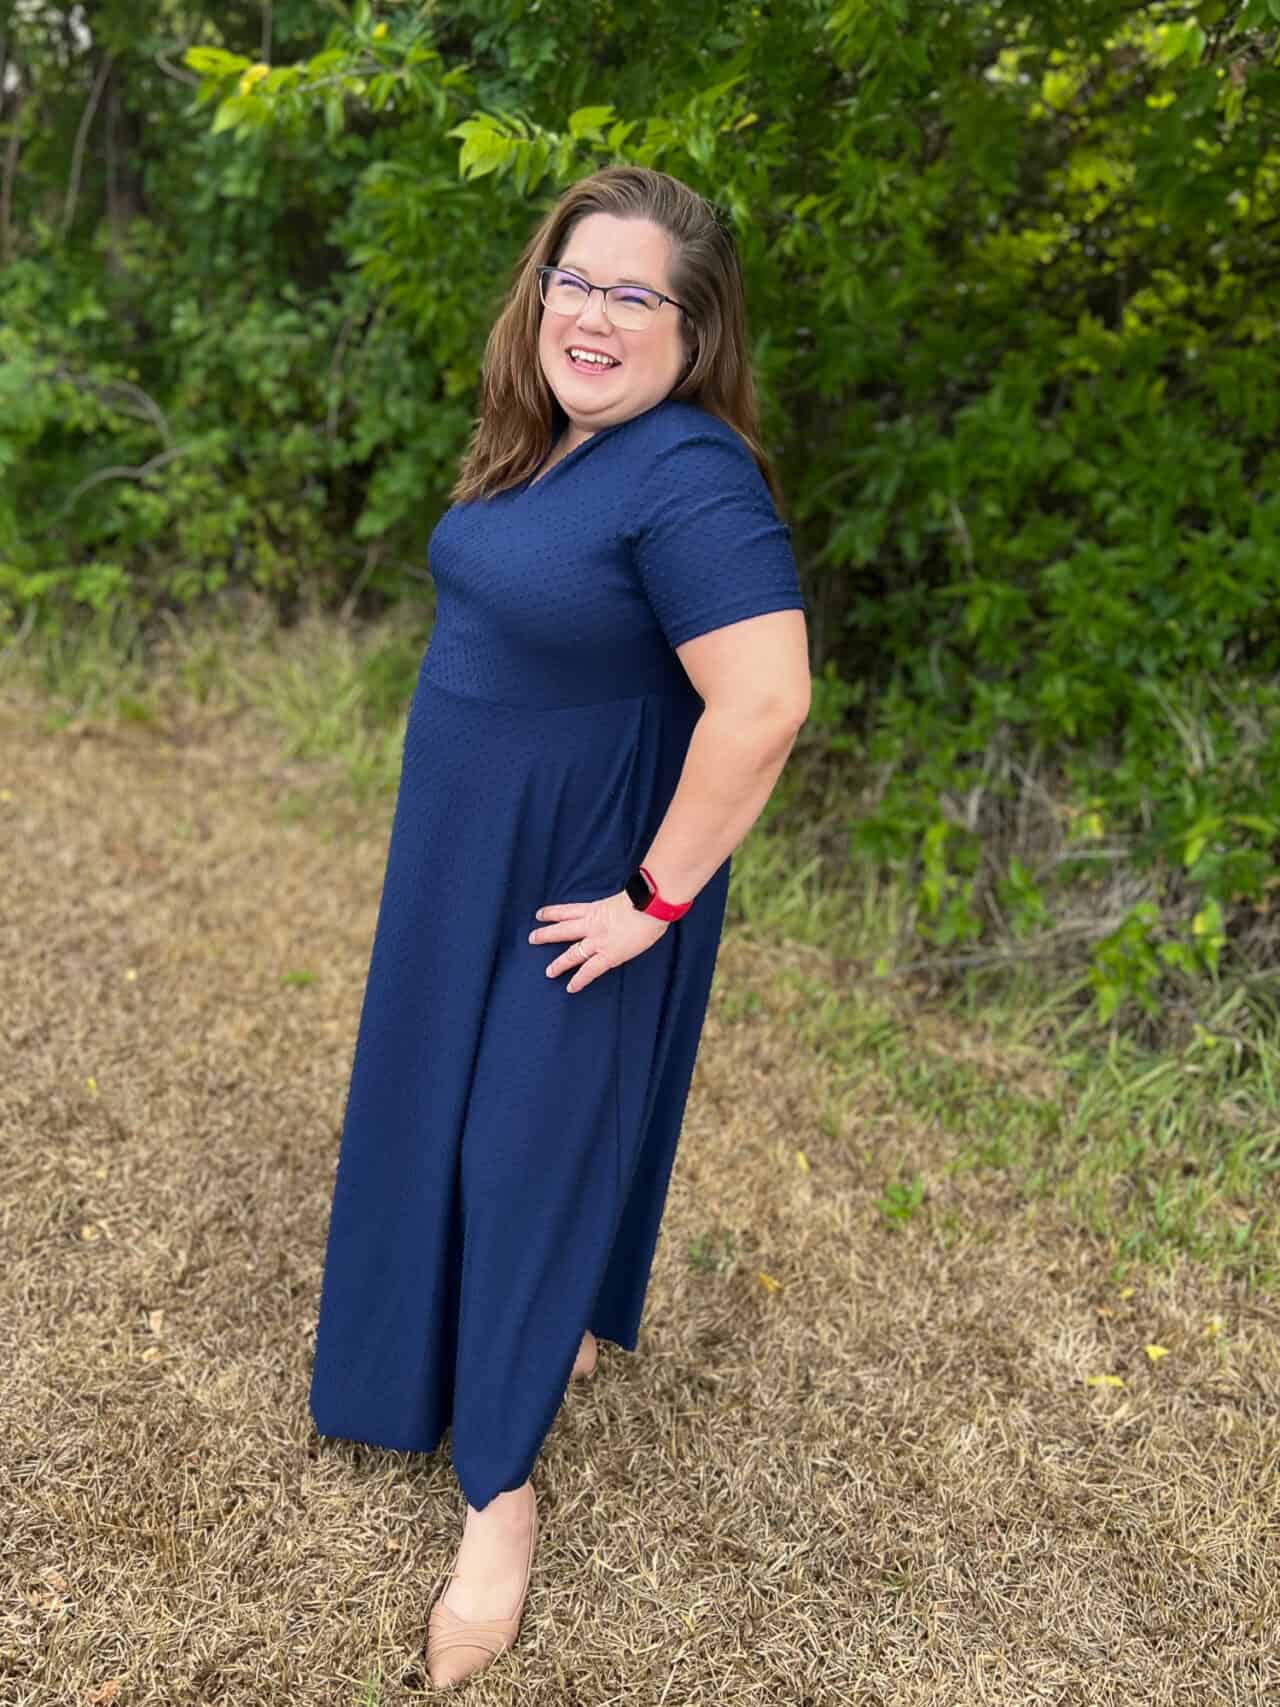 Shawl collar dress sewing pattern by Love Notions.